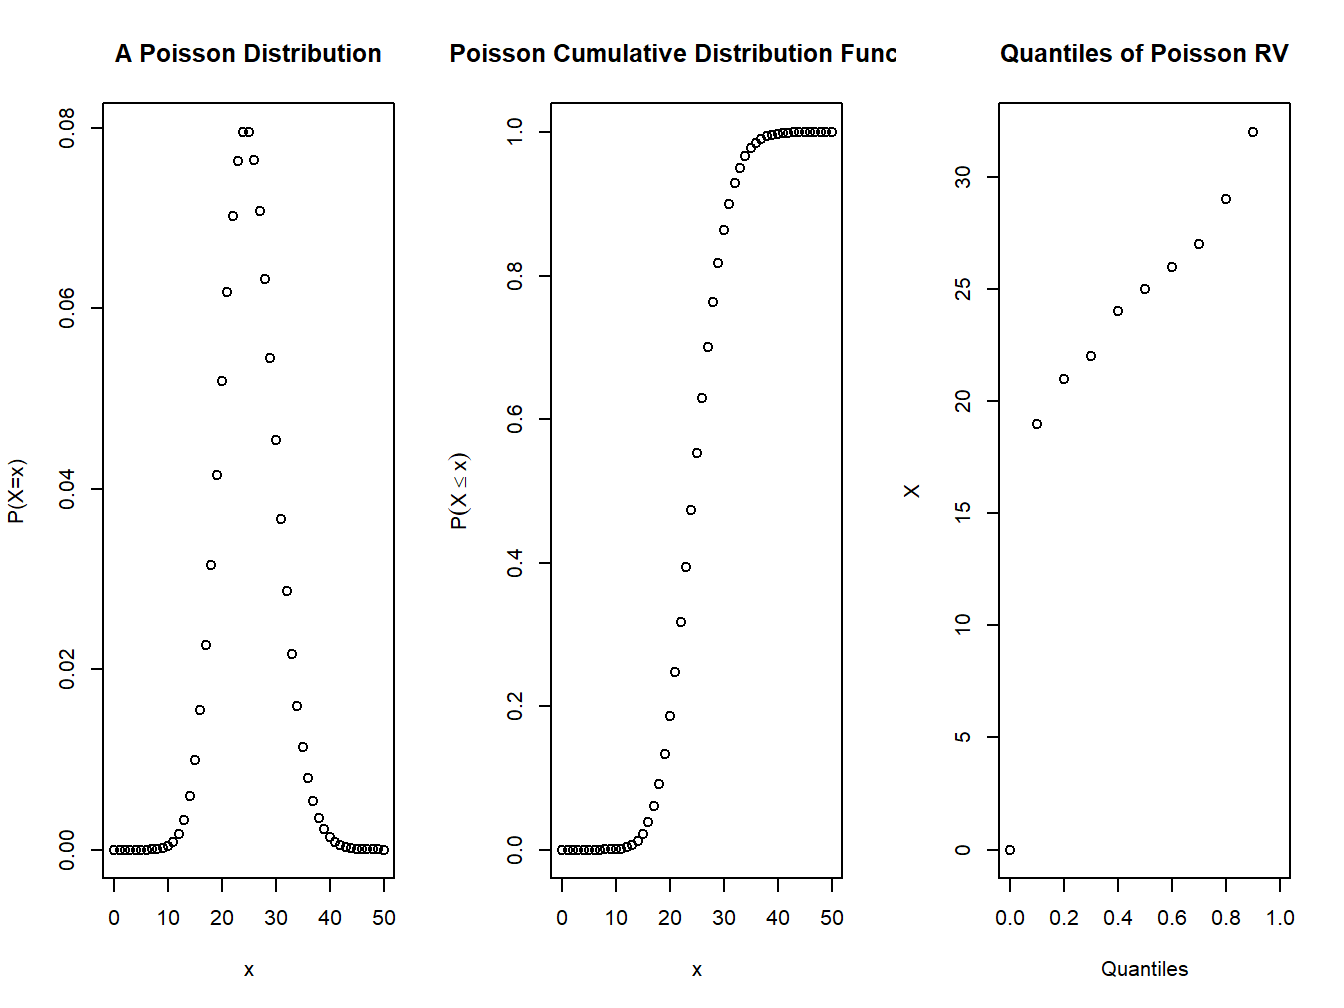 pmf and cdf of a Poisson distribution